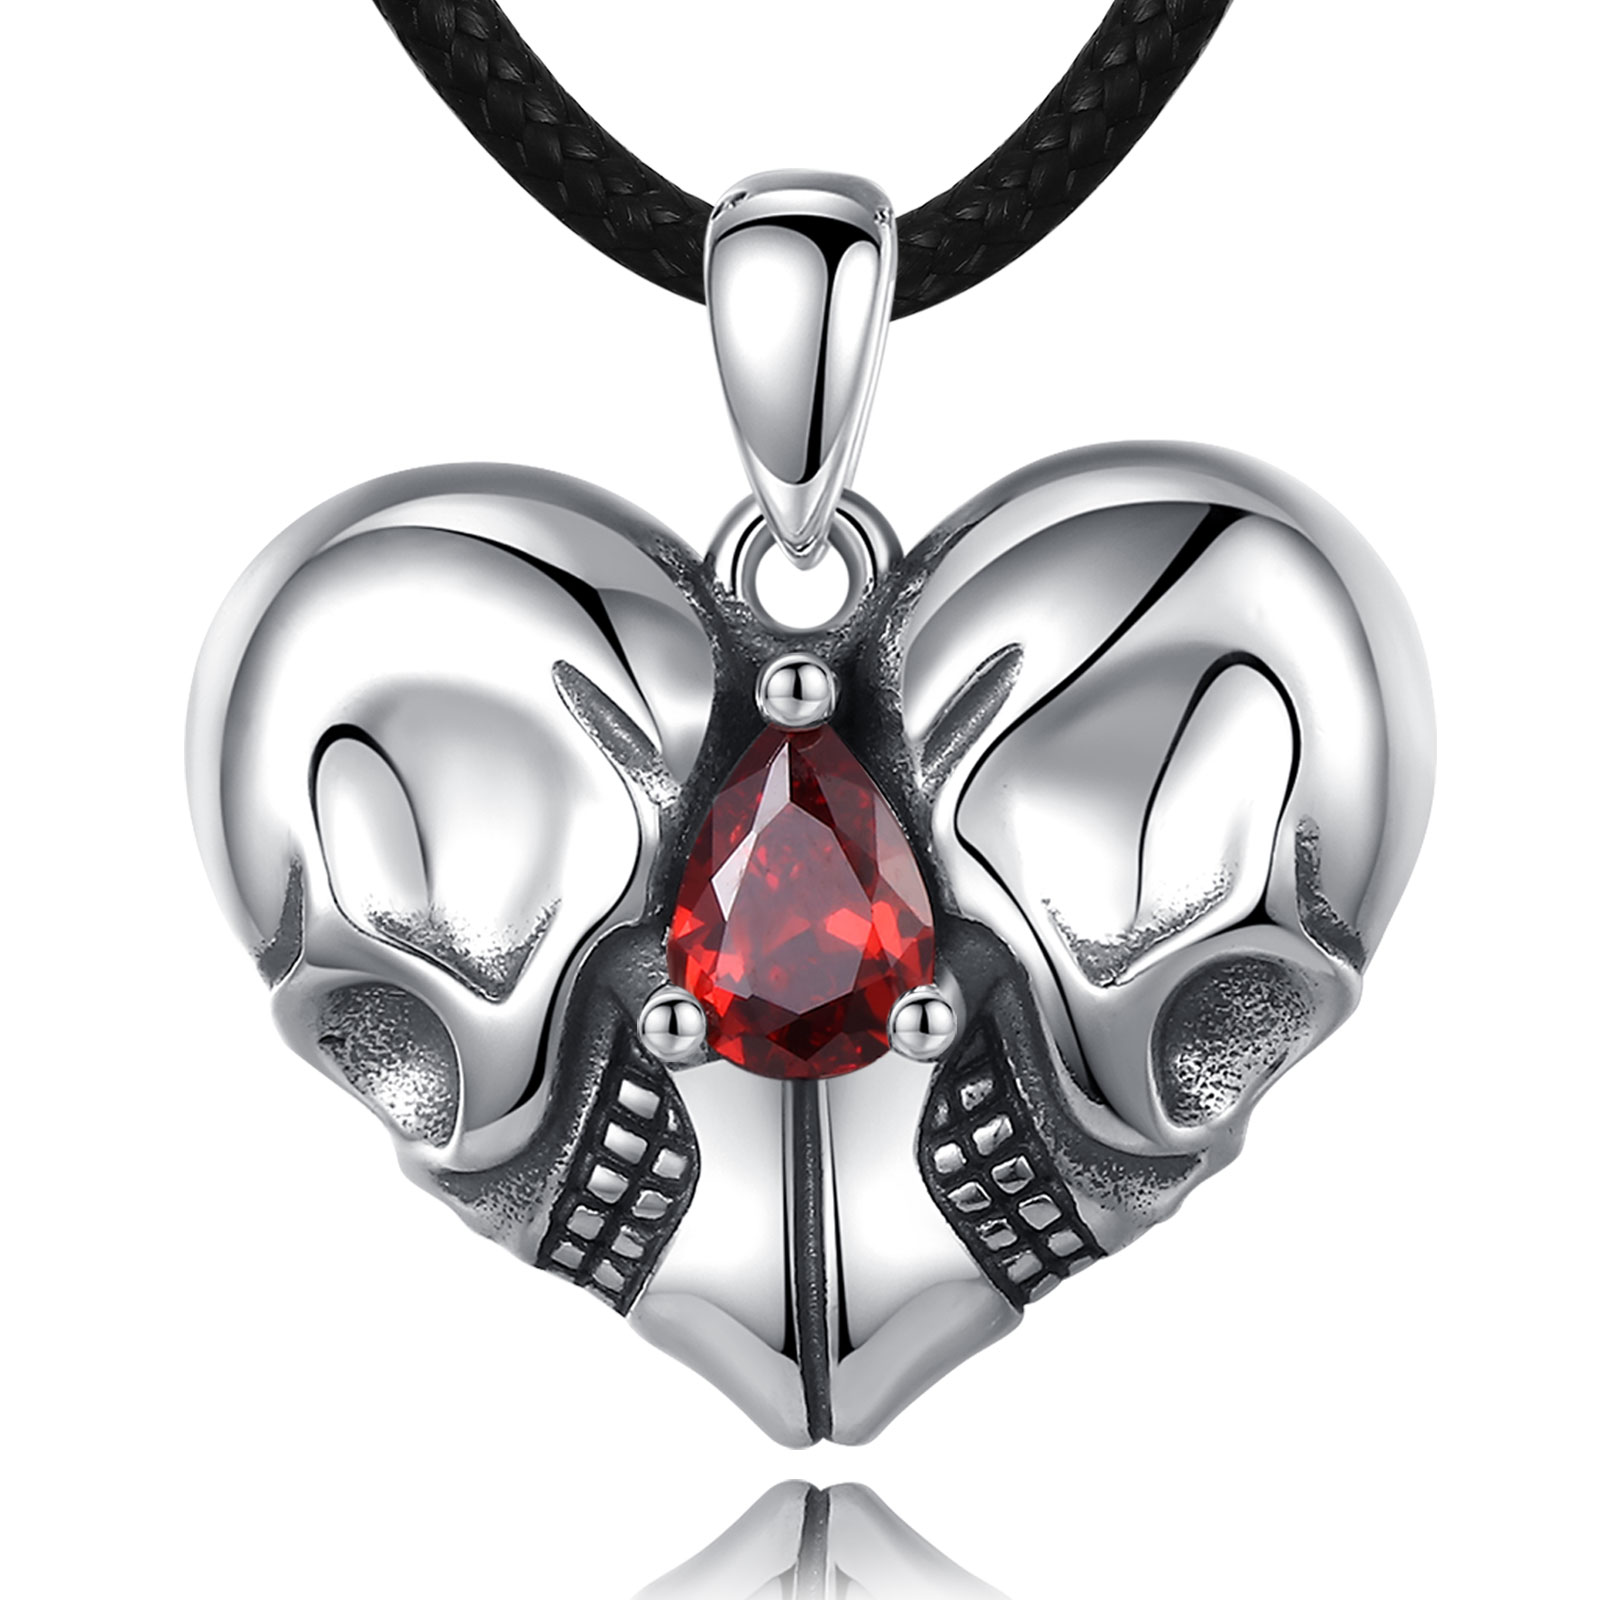 Merryshine 925 sterling silver heart punk skull necklace jewelry for Halloween gift